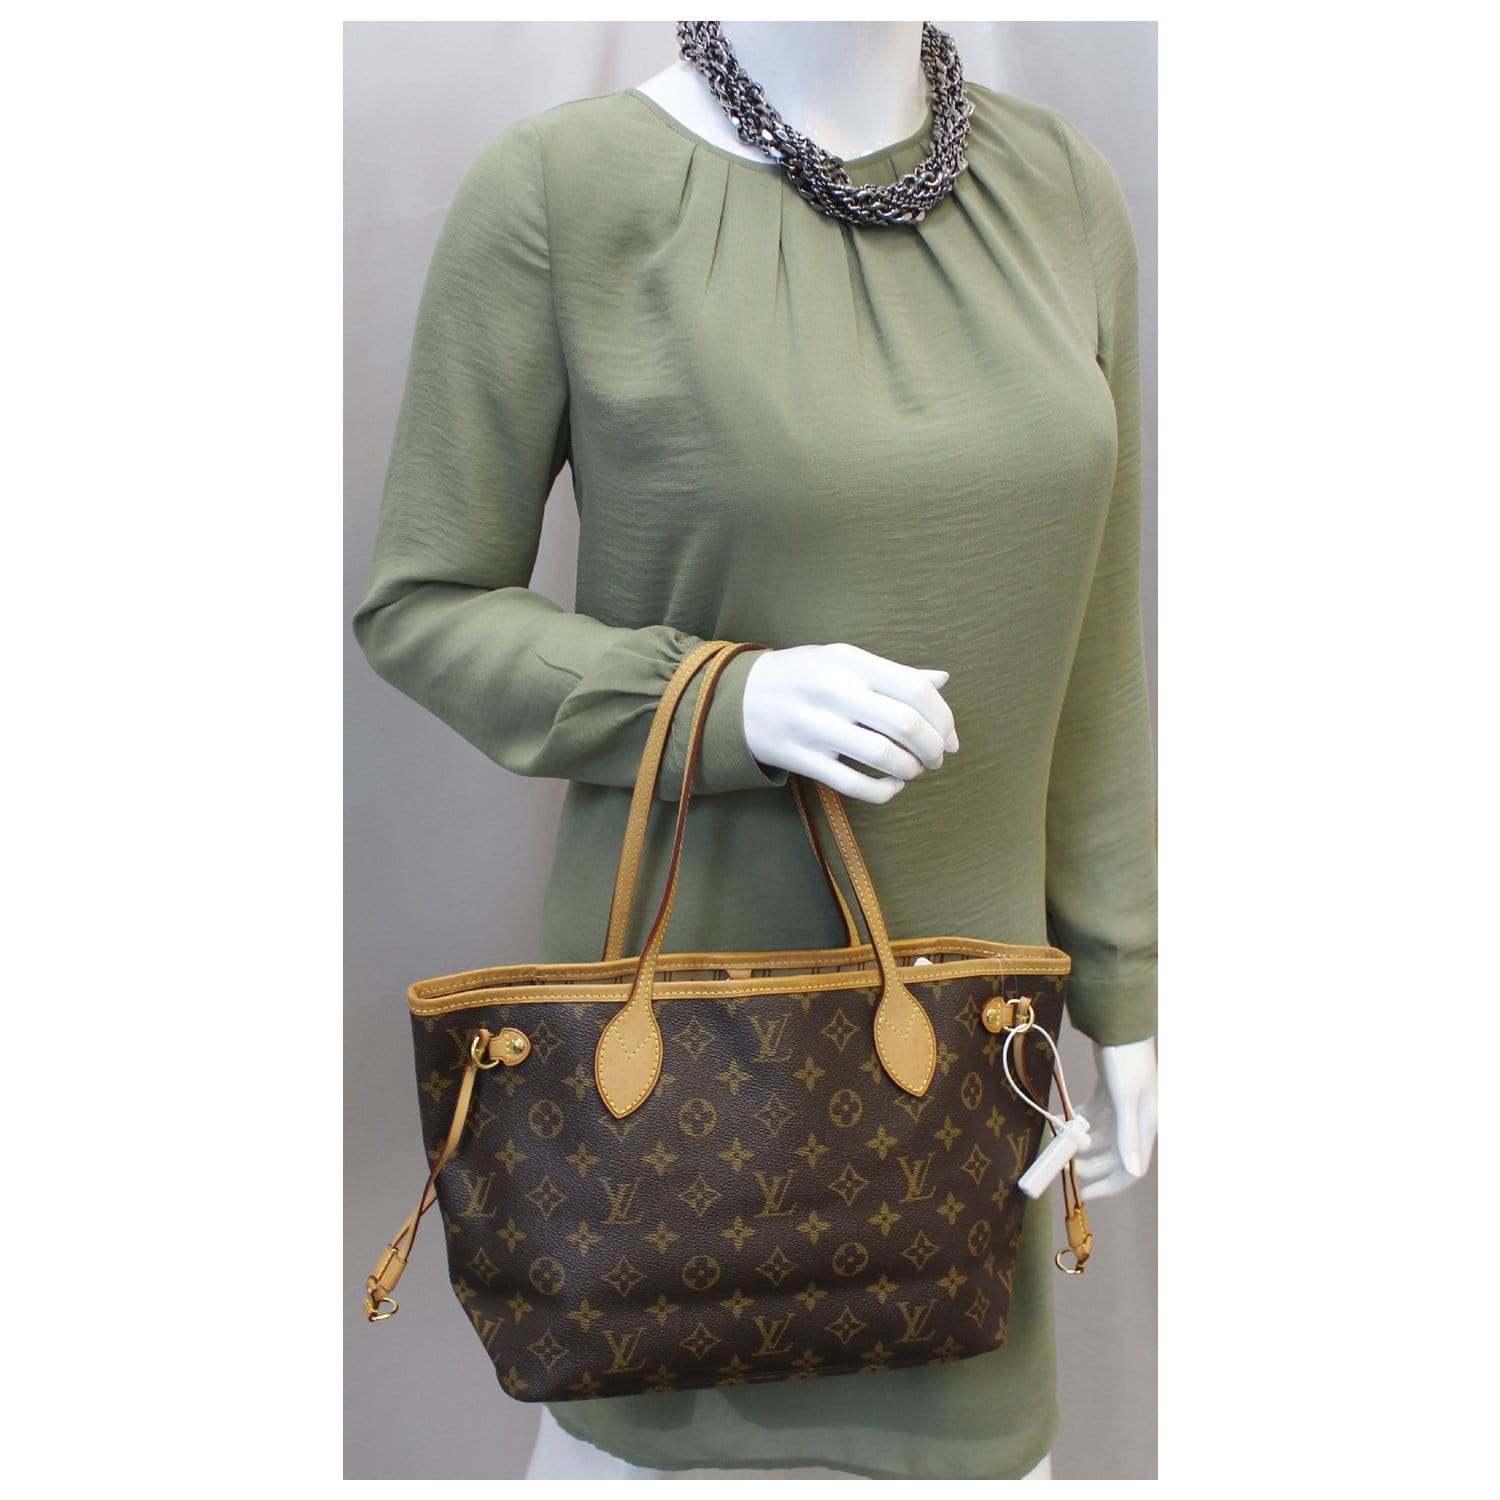 Just in.Louis Vuitton Neverfull PM in Monogram print. Comes